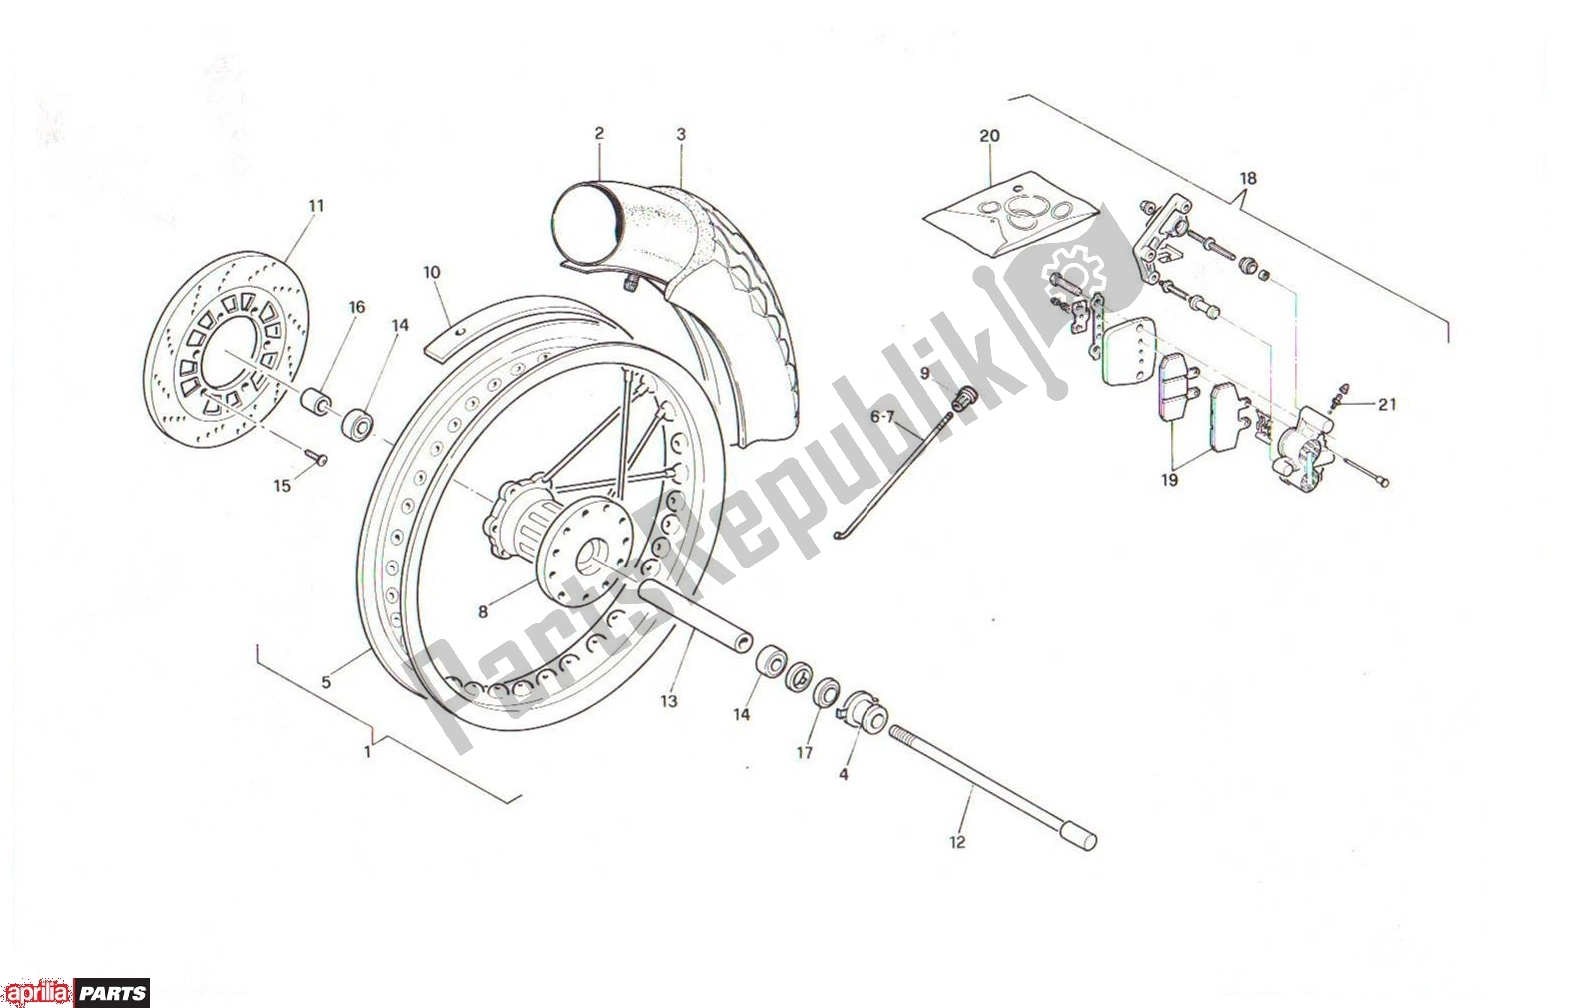 All parts for the Front Wheel of the Aprilia Red Rose 606 125 1987 - 1990